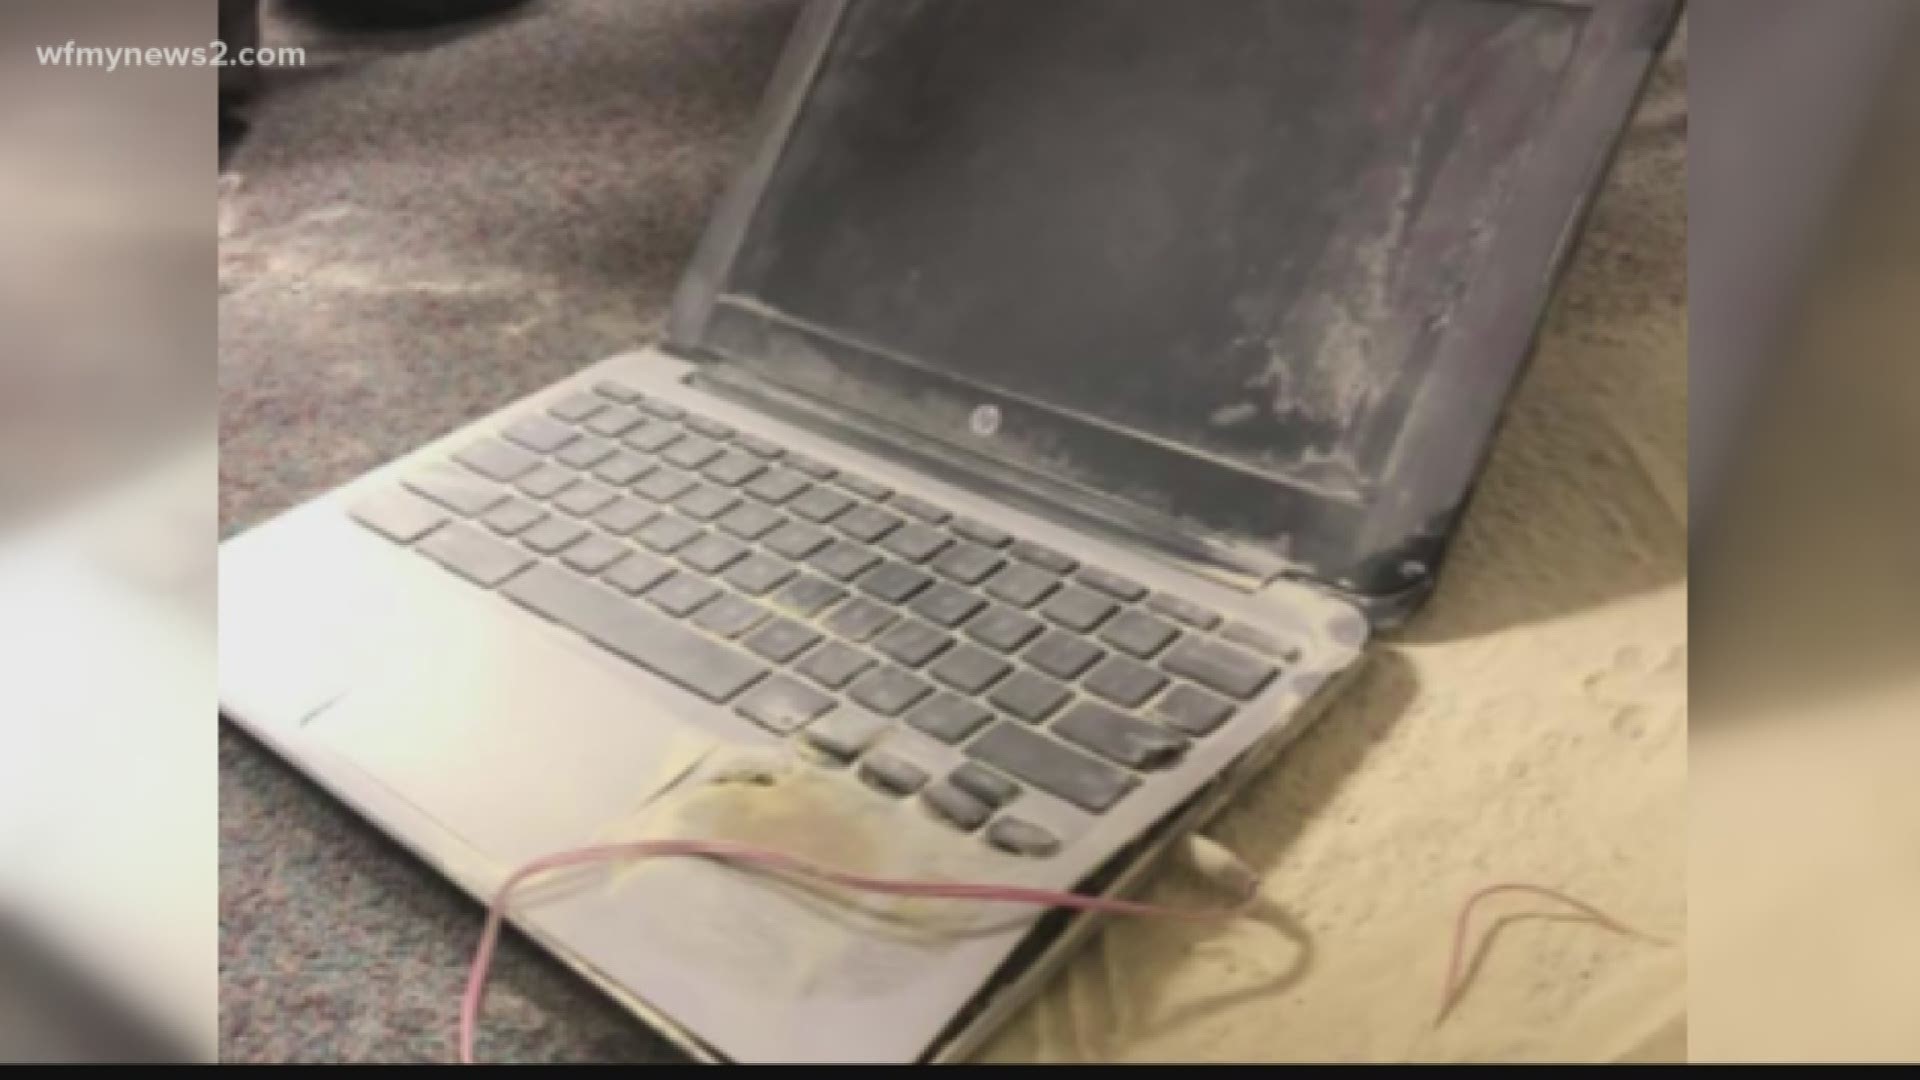 WSFCS officials say a third grade student's laptop overheated and started smoking at Louisville Elementary.